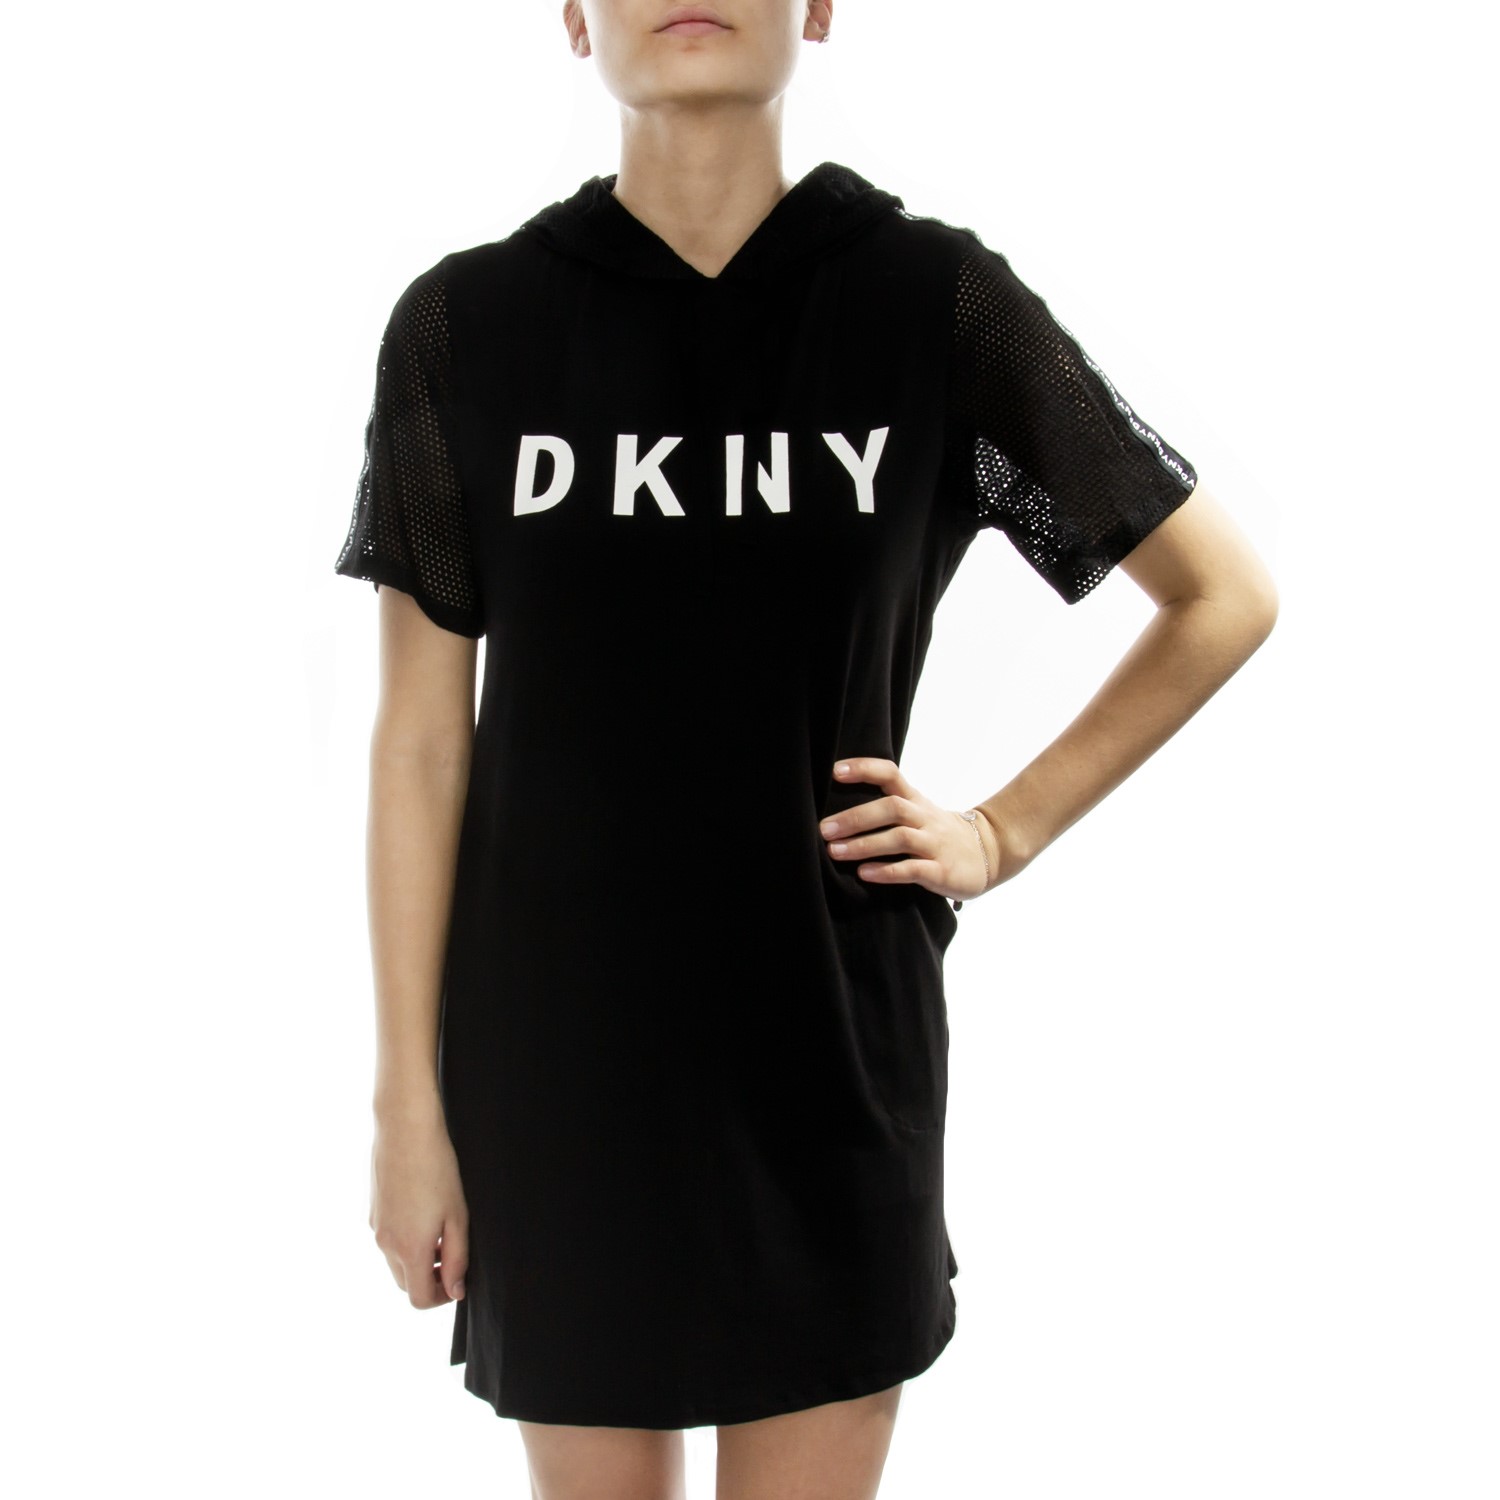 DKNY Spell It Out Hooded Sleepshirt